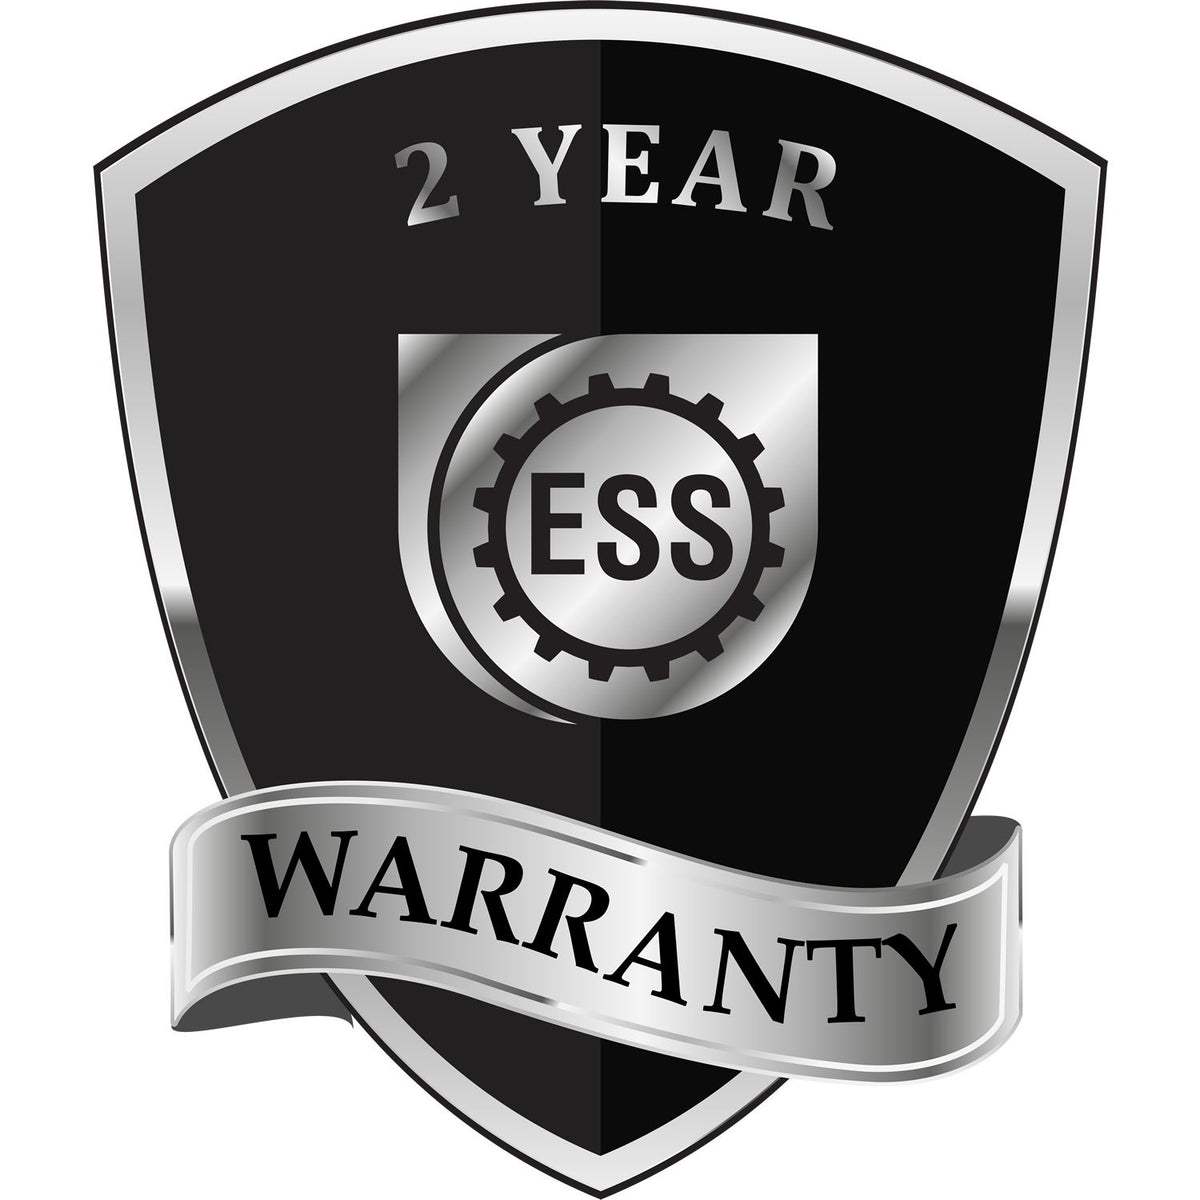 A badge or emblem showing a warranty icon for the Kansas Engineer Desk Seal